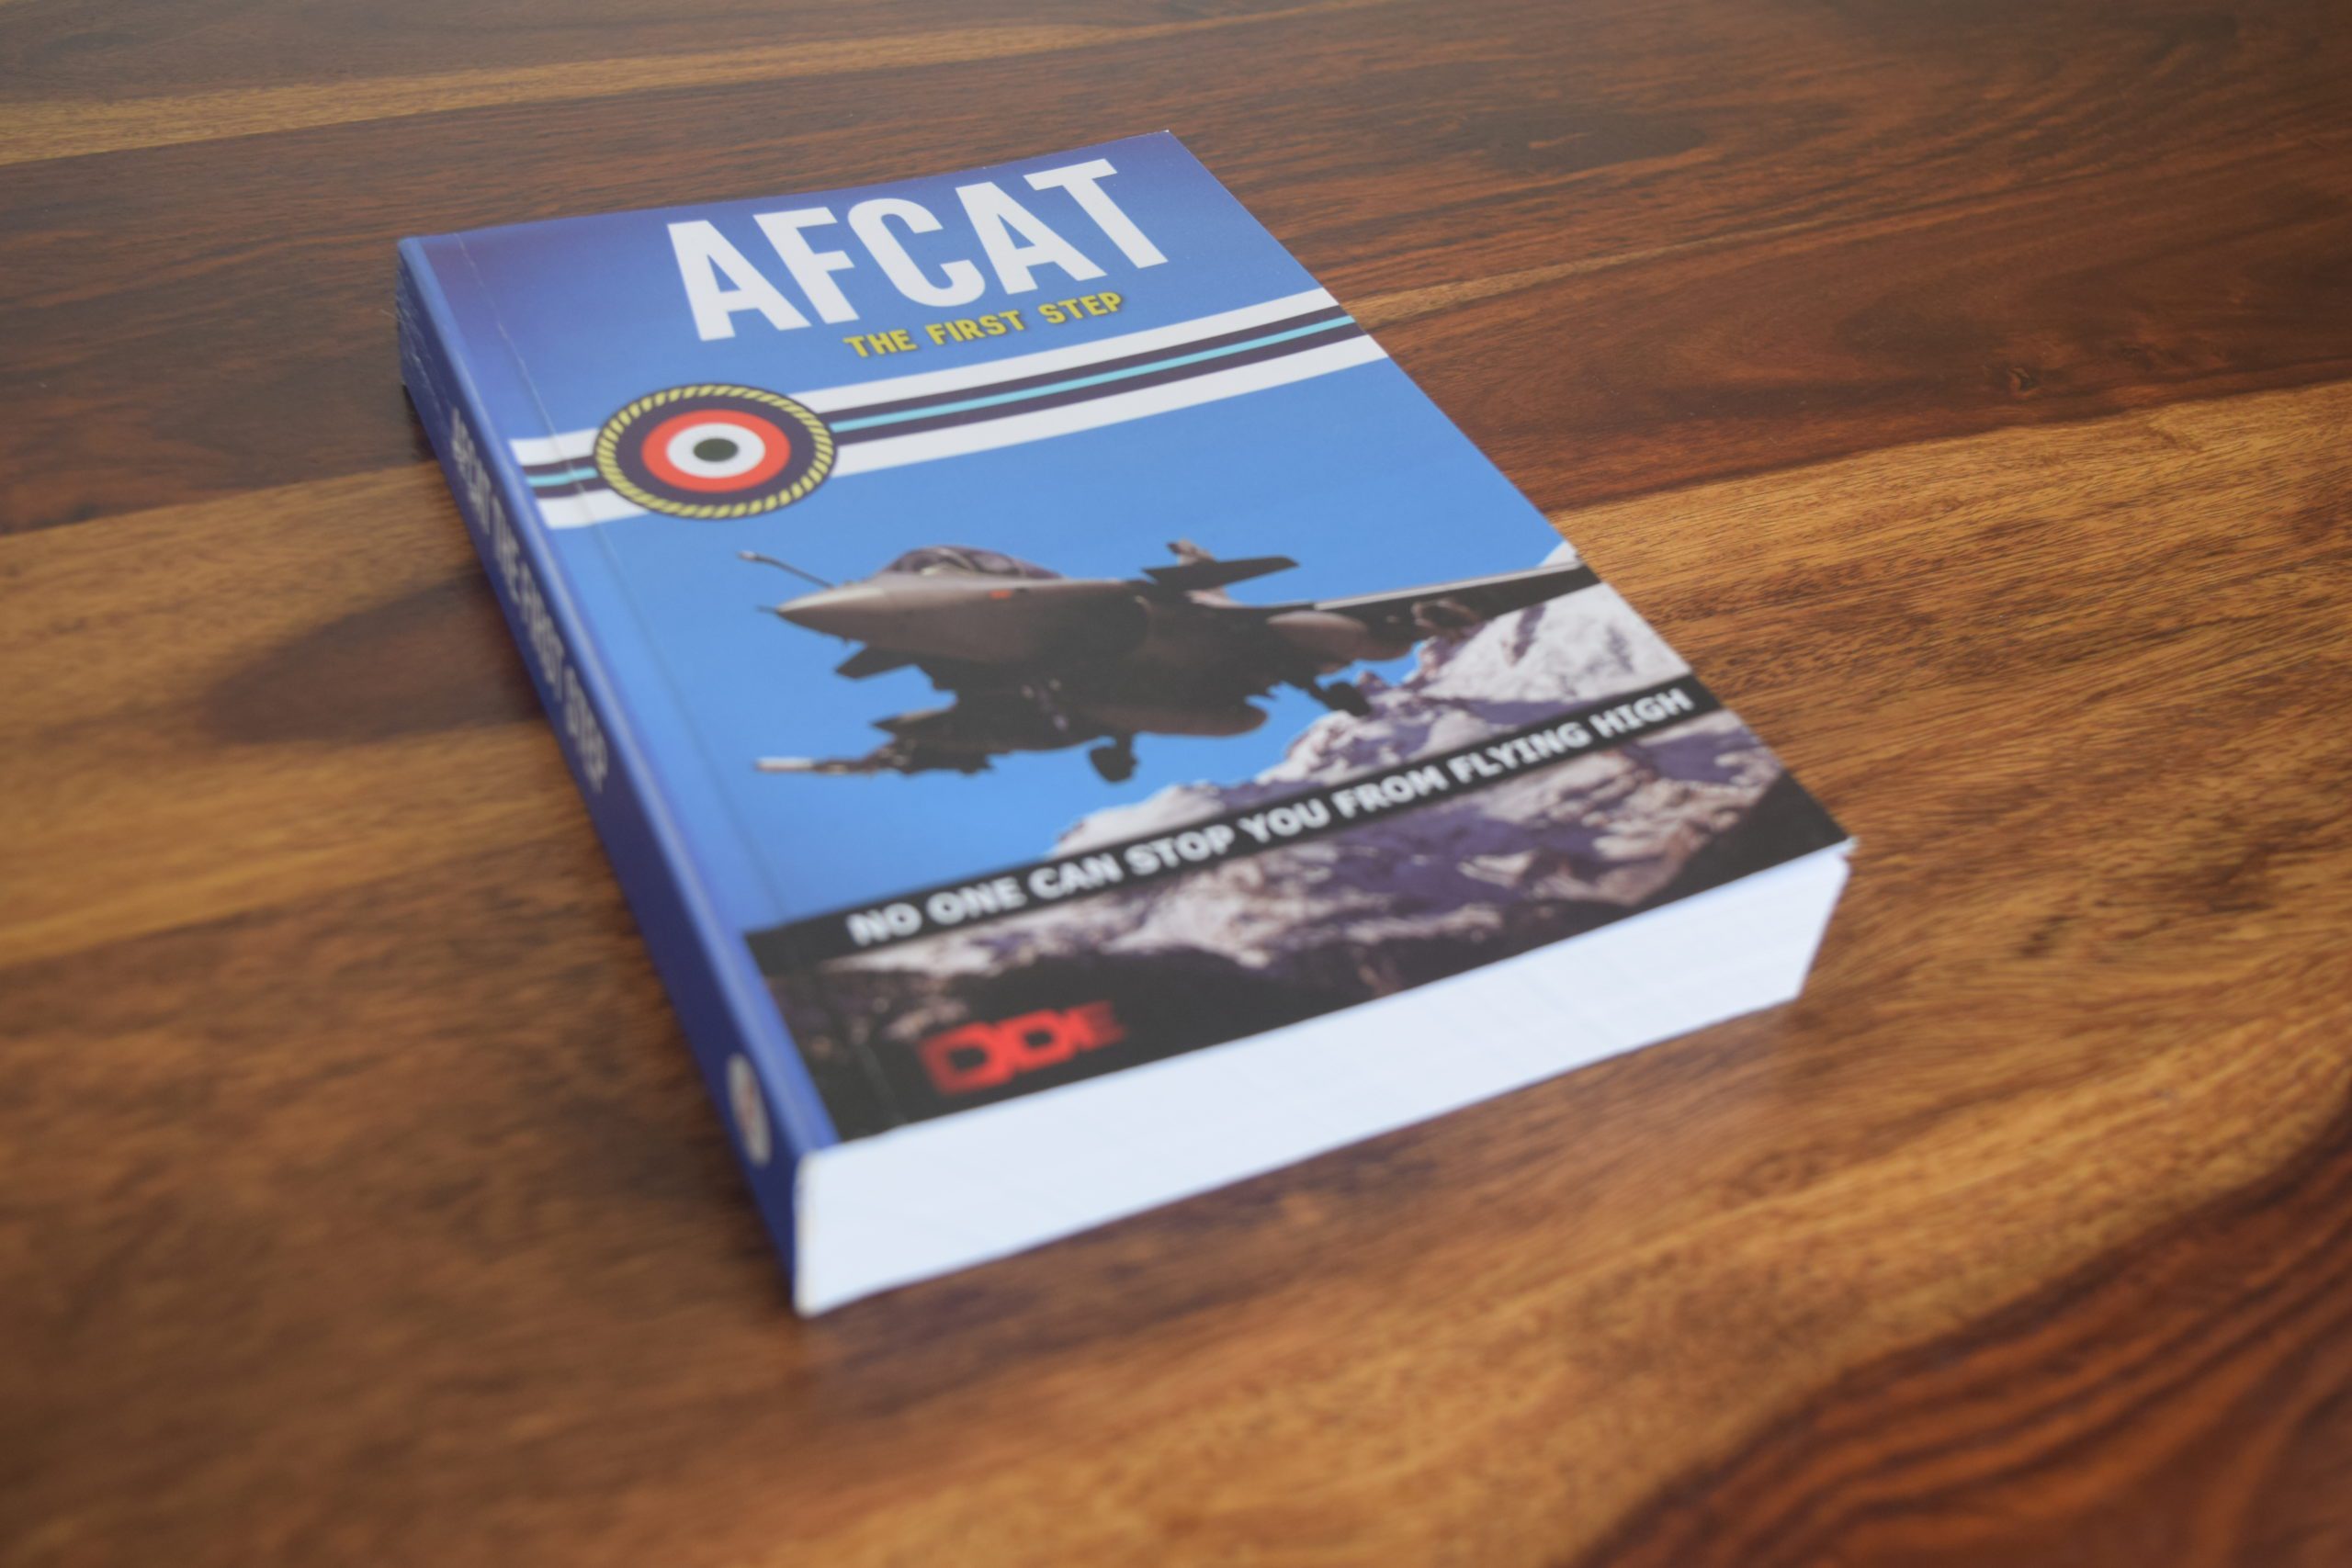 Afcat the first step book by dde